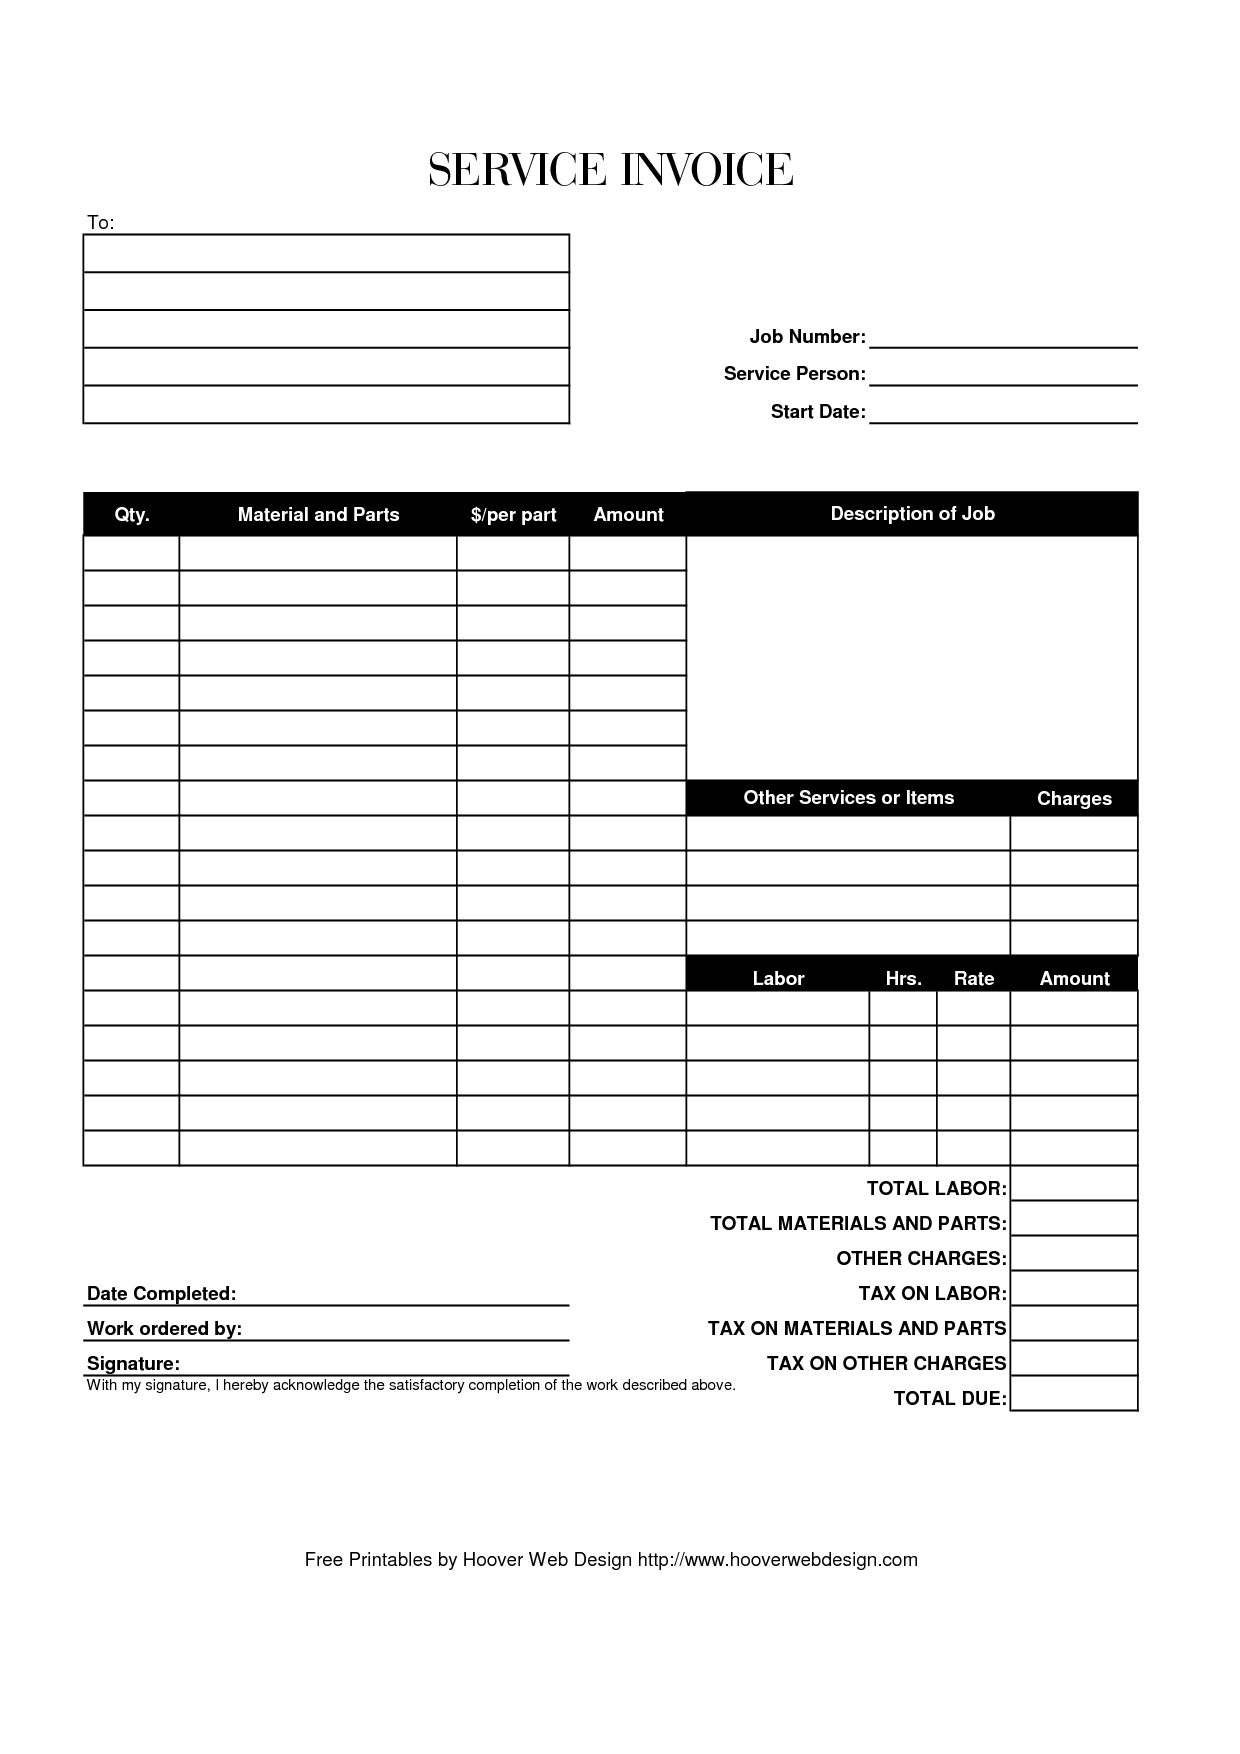 Hoover Receipts | Free Printable Service Invoice Template - Pdf - Free Printable Sales Receipt Form